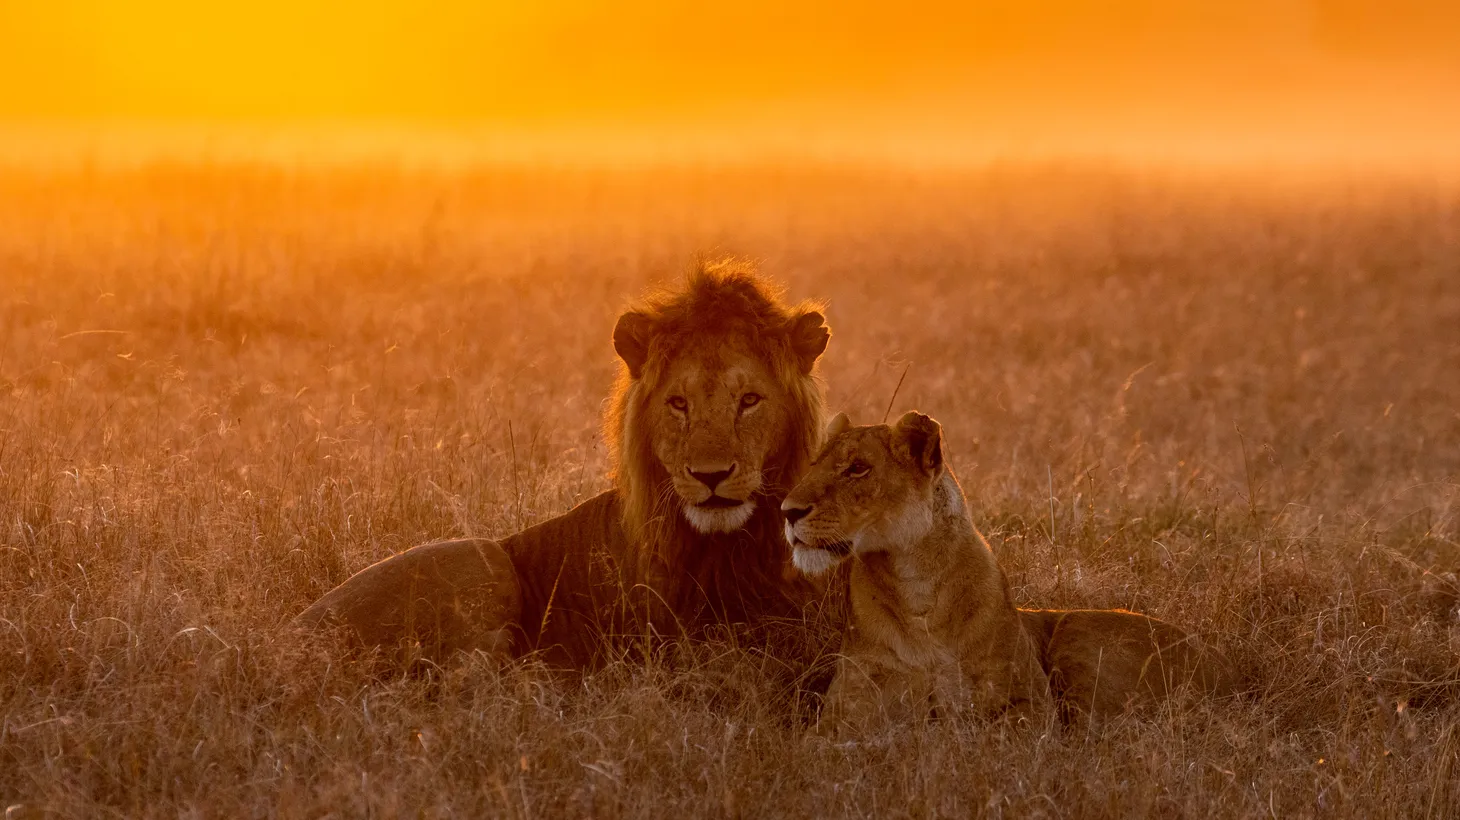 Research shows that a dark mane absorbs a lot of heat, and lions must expend more energy to do normal things when it’s hotter. However, lionesses are drawn to darker manes since they traditionally show good fitness and health. That’s all according to writer Kasha Patel.